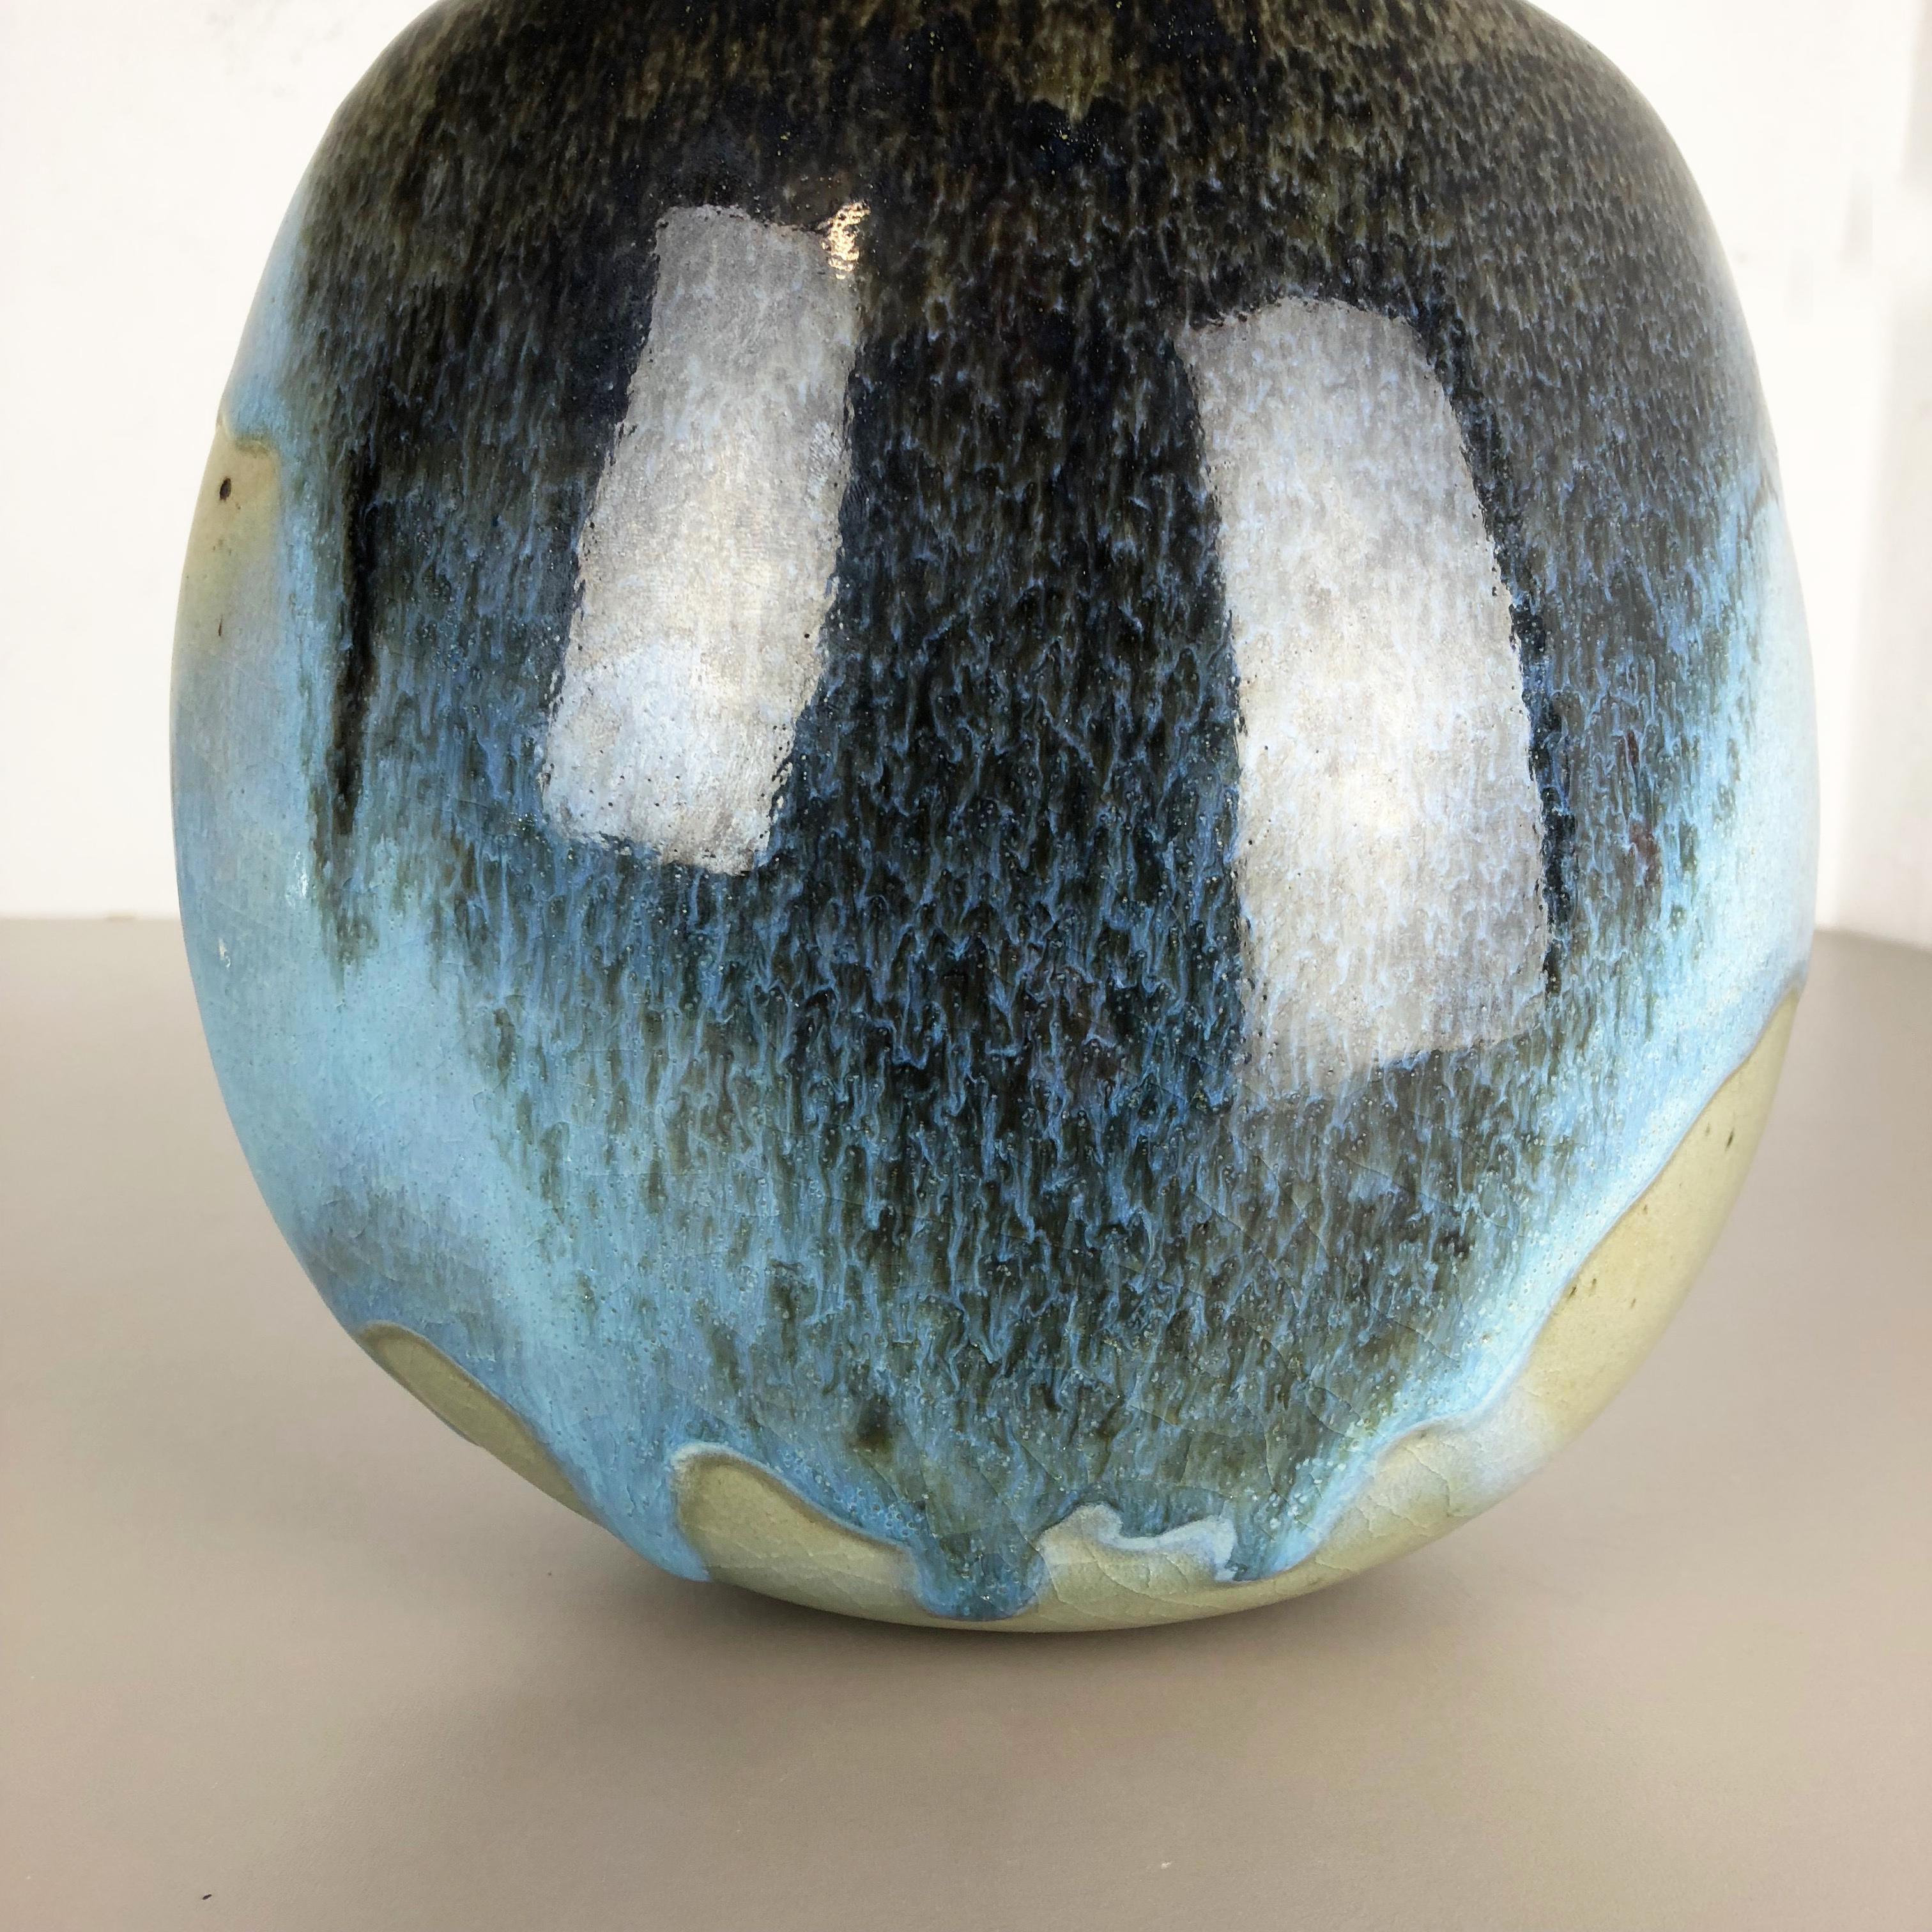 Abstract Ceramic Studio Stoneware Vase by Gotlind Weigel, Germany, 1960s For Sale 3